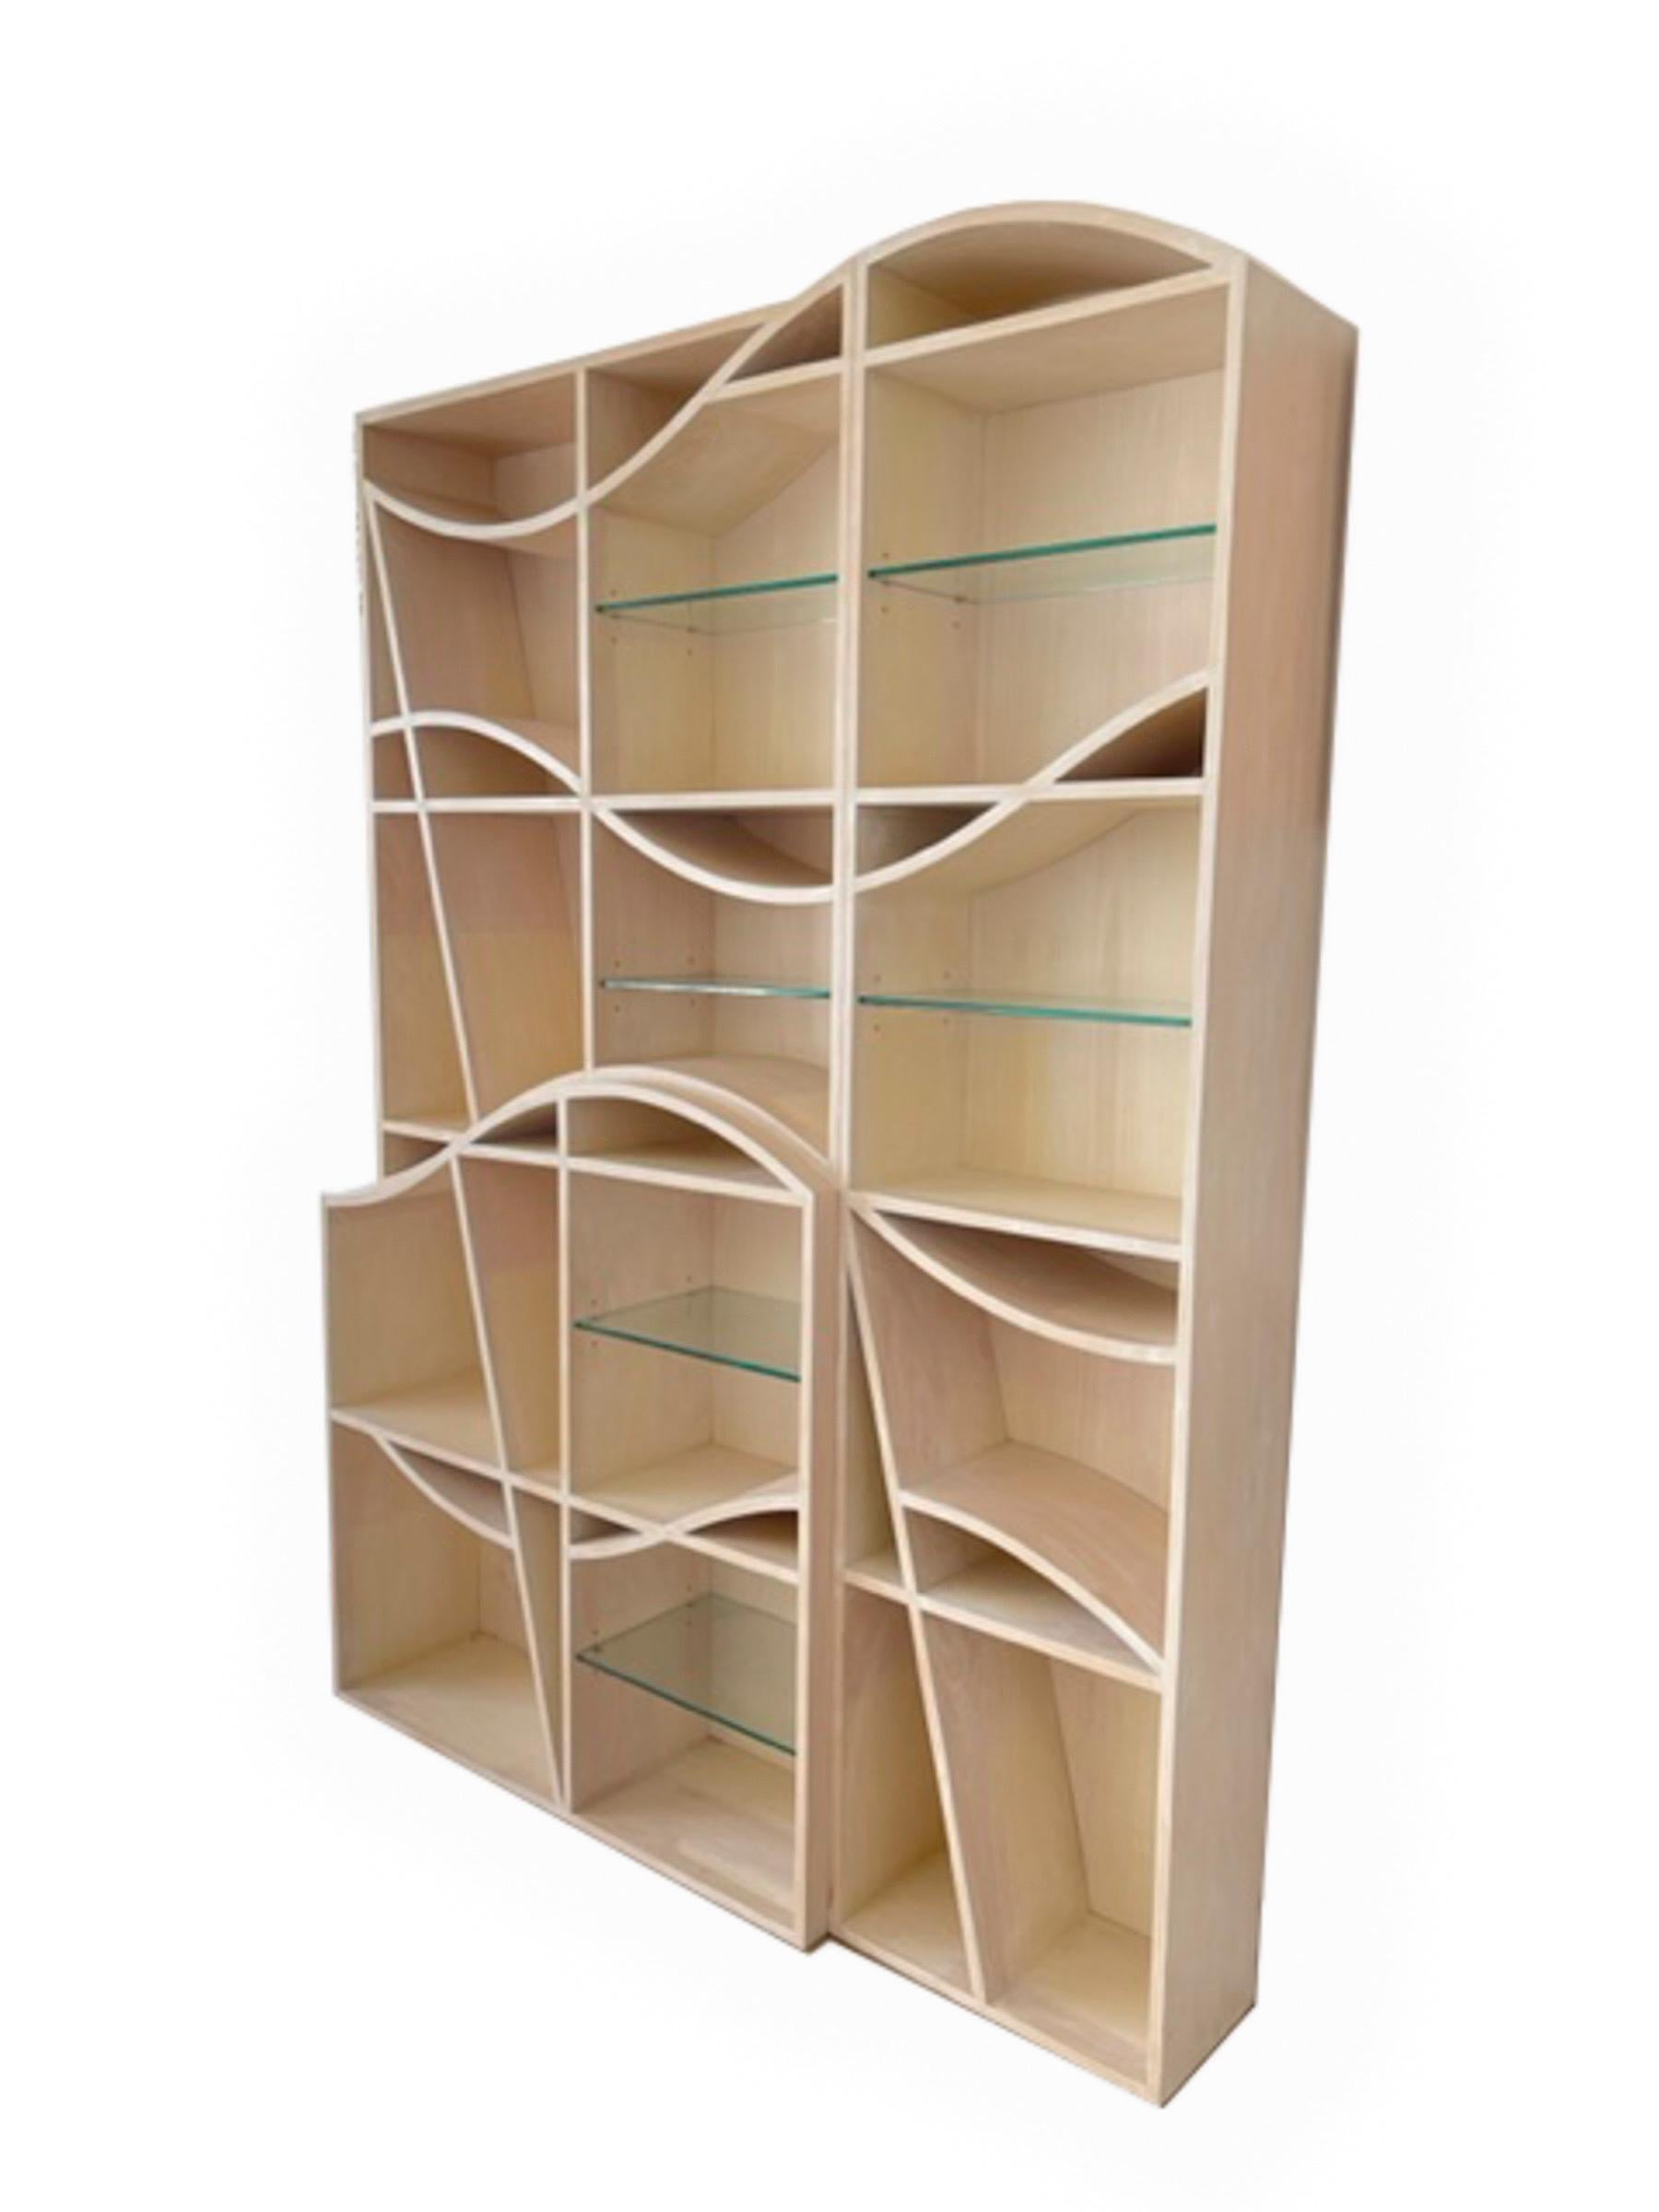 One of a kind bookcase rendered in limed oak with undulating oak shelves and six adjustable glass shelves, numerous uniquely shaped compartments make this piece multifunctional for collections of objet d'art and books. Privately commissioned piece